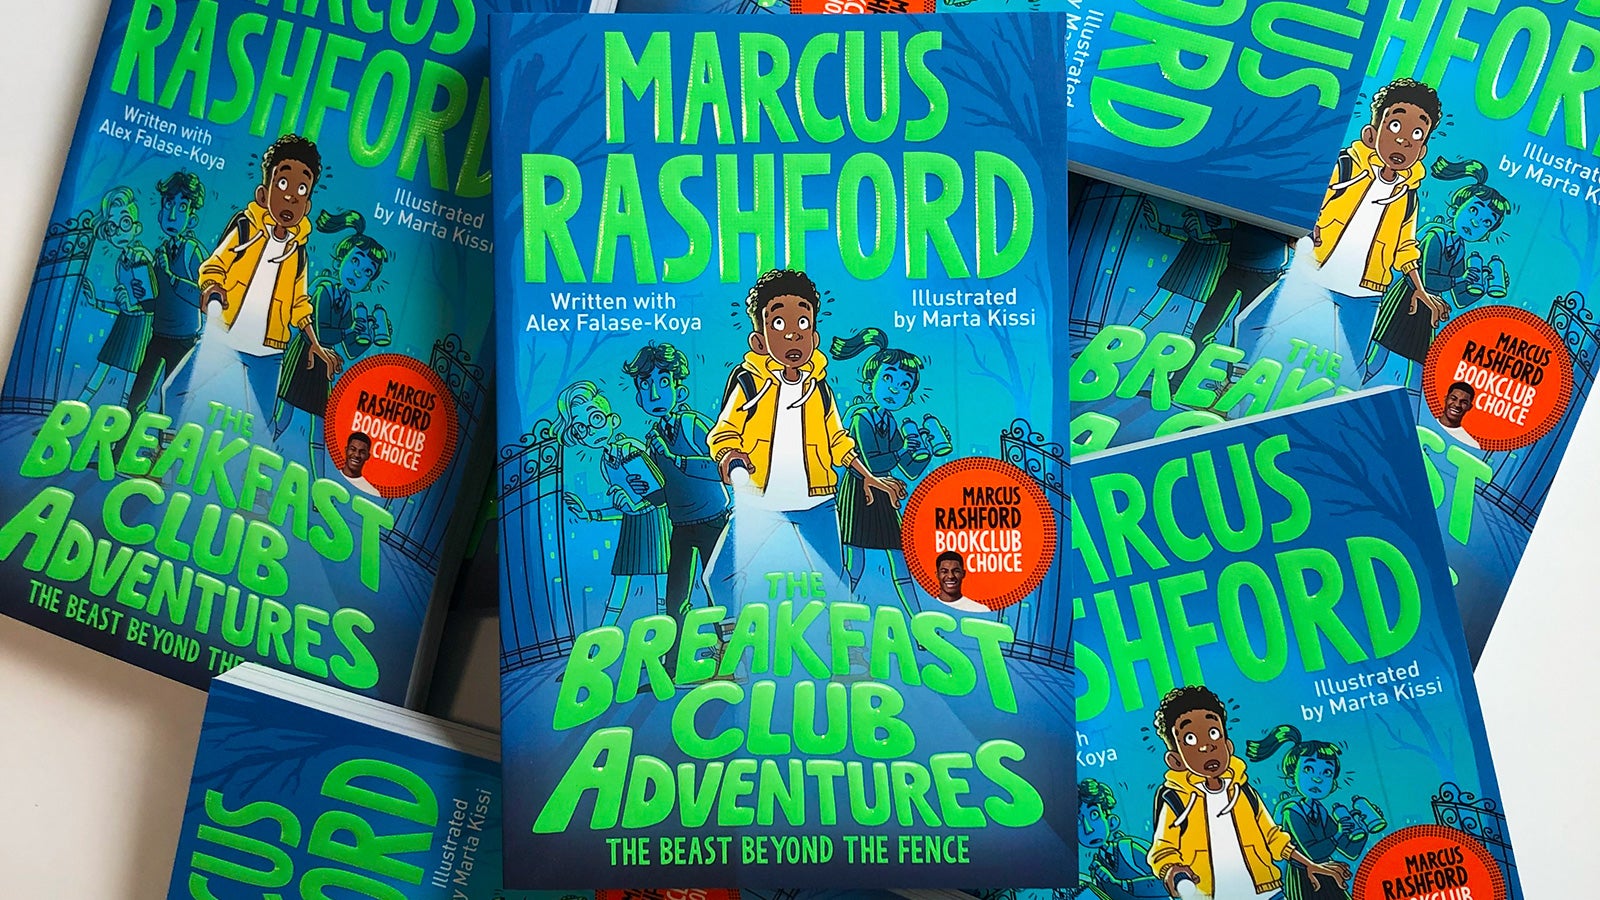 Copies of The Breakfast Club Adventures by Marcus Rashford messily spread across a table